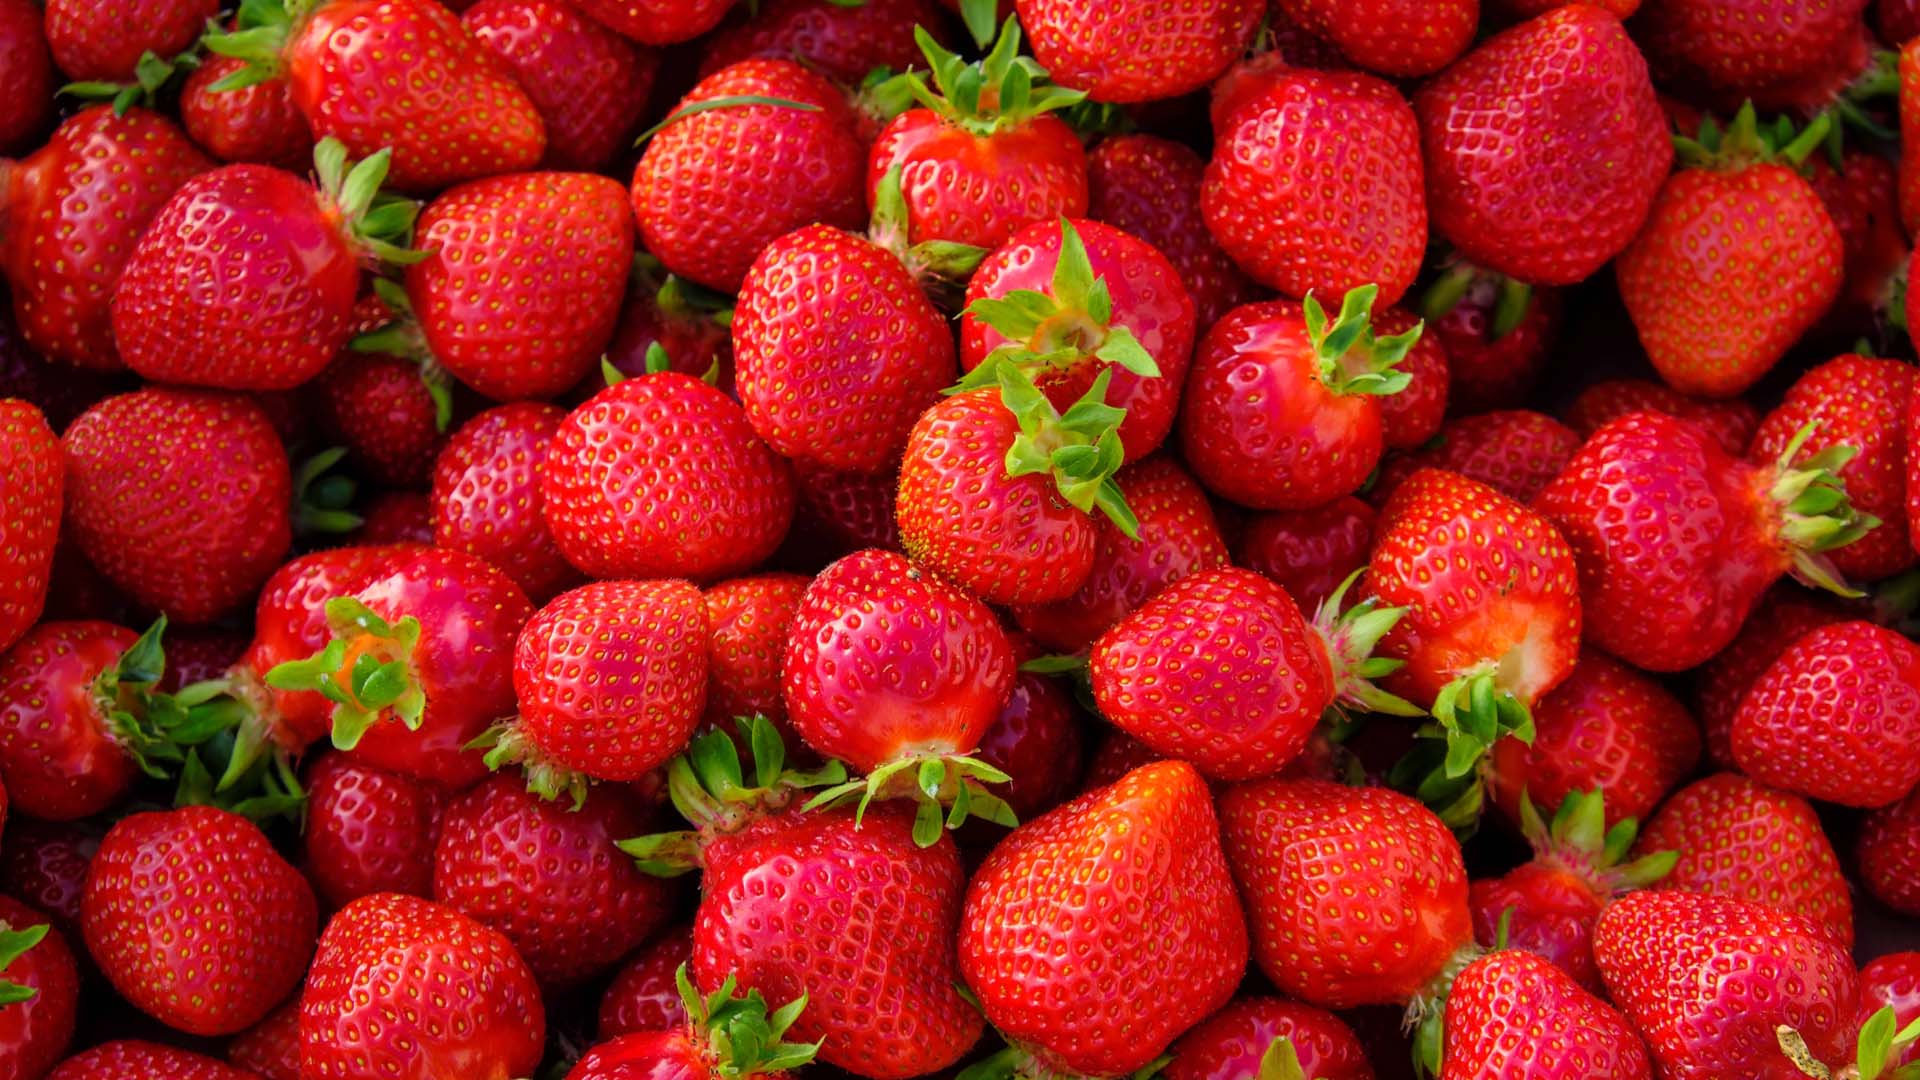 Lots of strawberries, which benefit your health in many ways.